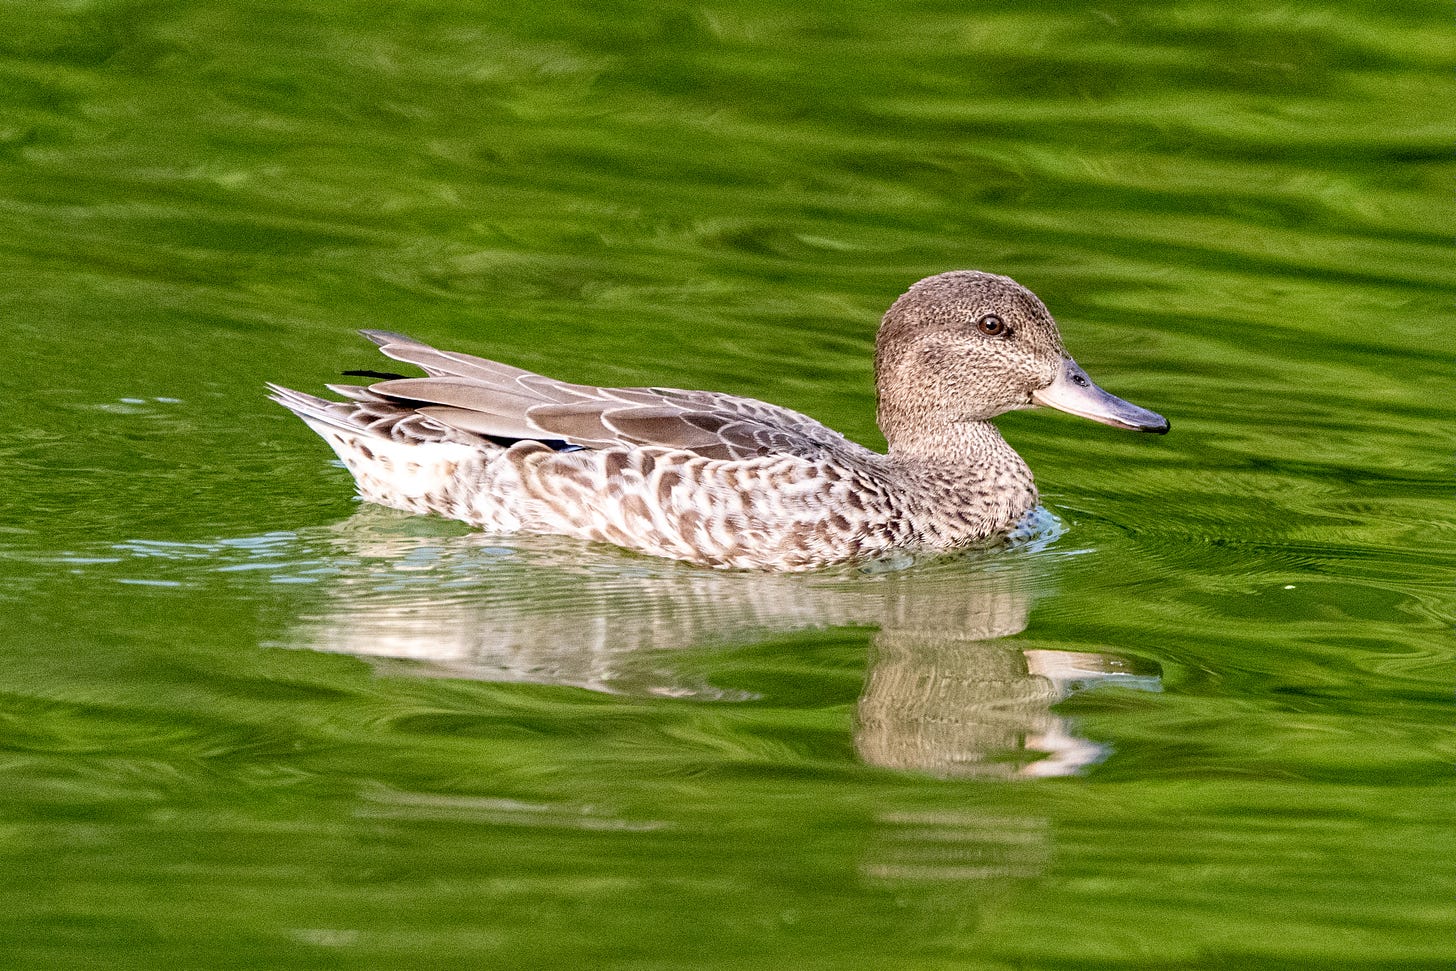 A green-winged teal, looking for all the world like a compact, subtler mallard, swims on green lakewater